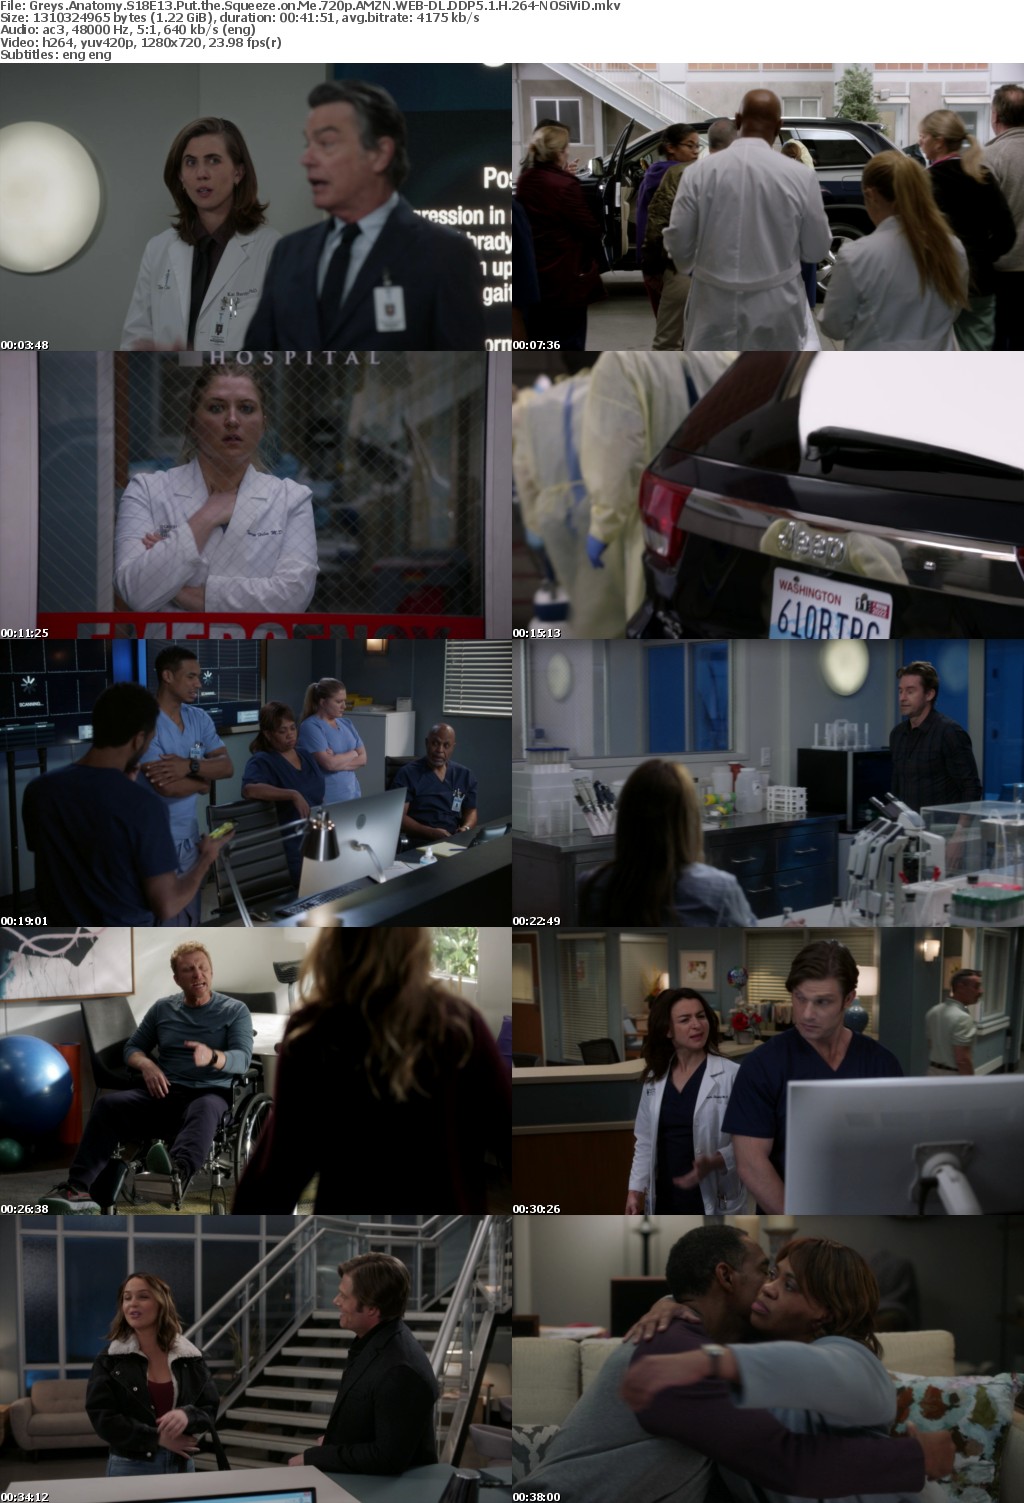 Greys Anatomy S18E13 Put the Squeeze on Me 720p AMZN WEBRip DDP5 1 x264-NOSiViD